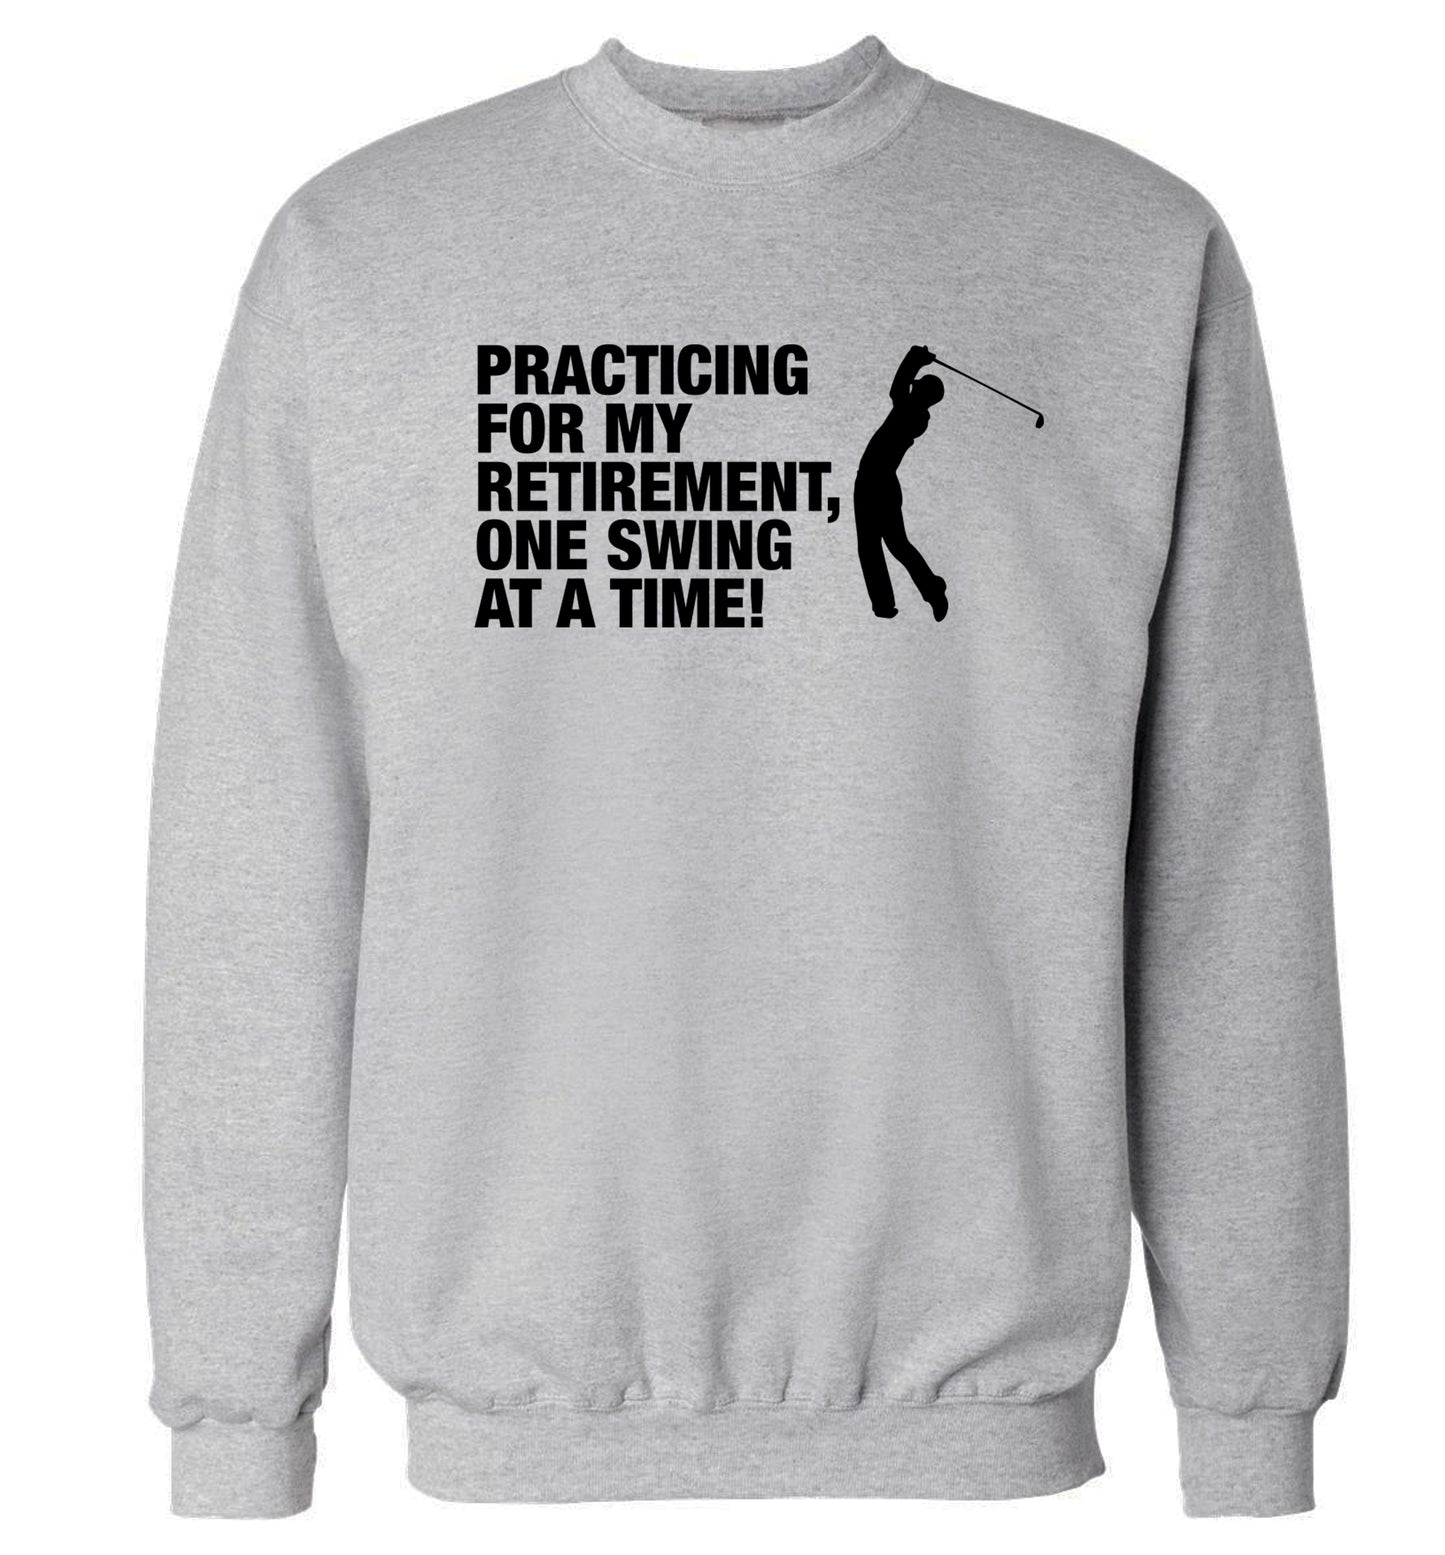 Practicing for my retirement one swing at a time Adult's unisex grey Sweater 2XL